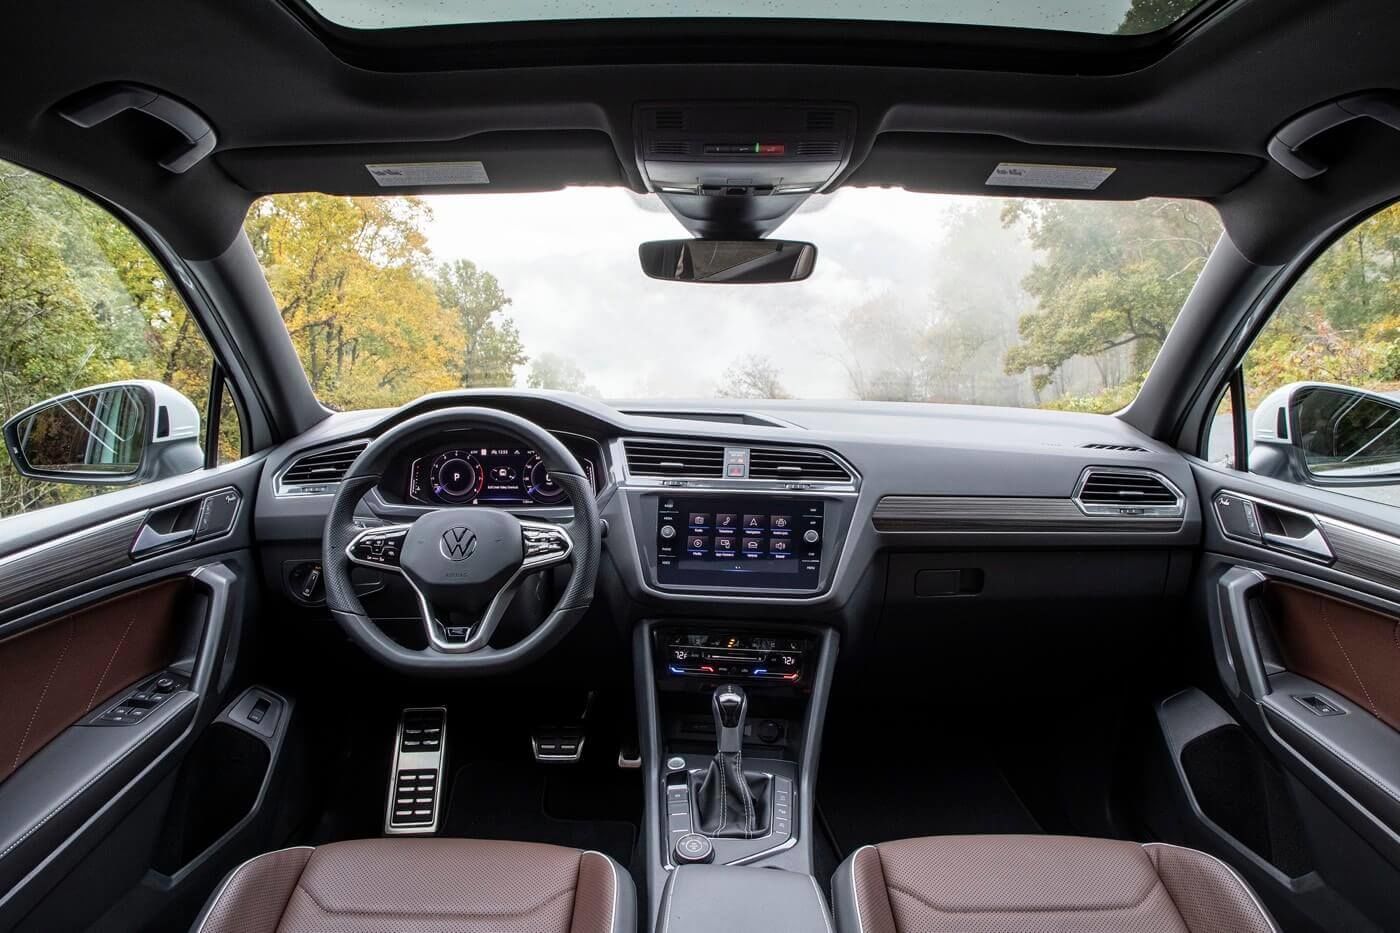 Front cockpit of a 2022 Volkswagen Tiguan including all its on-board technologies